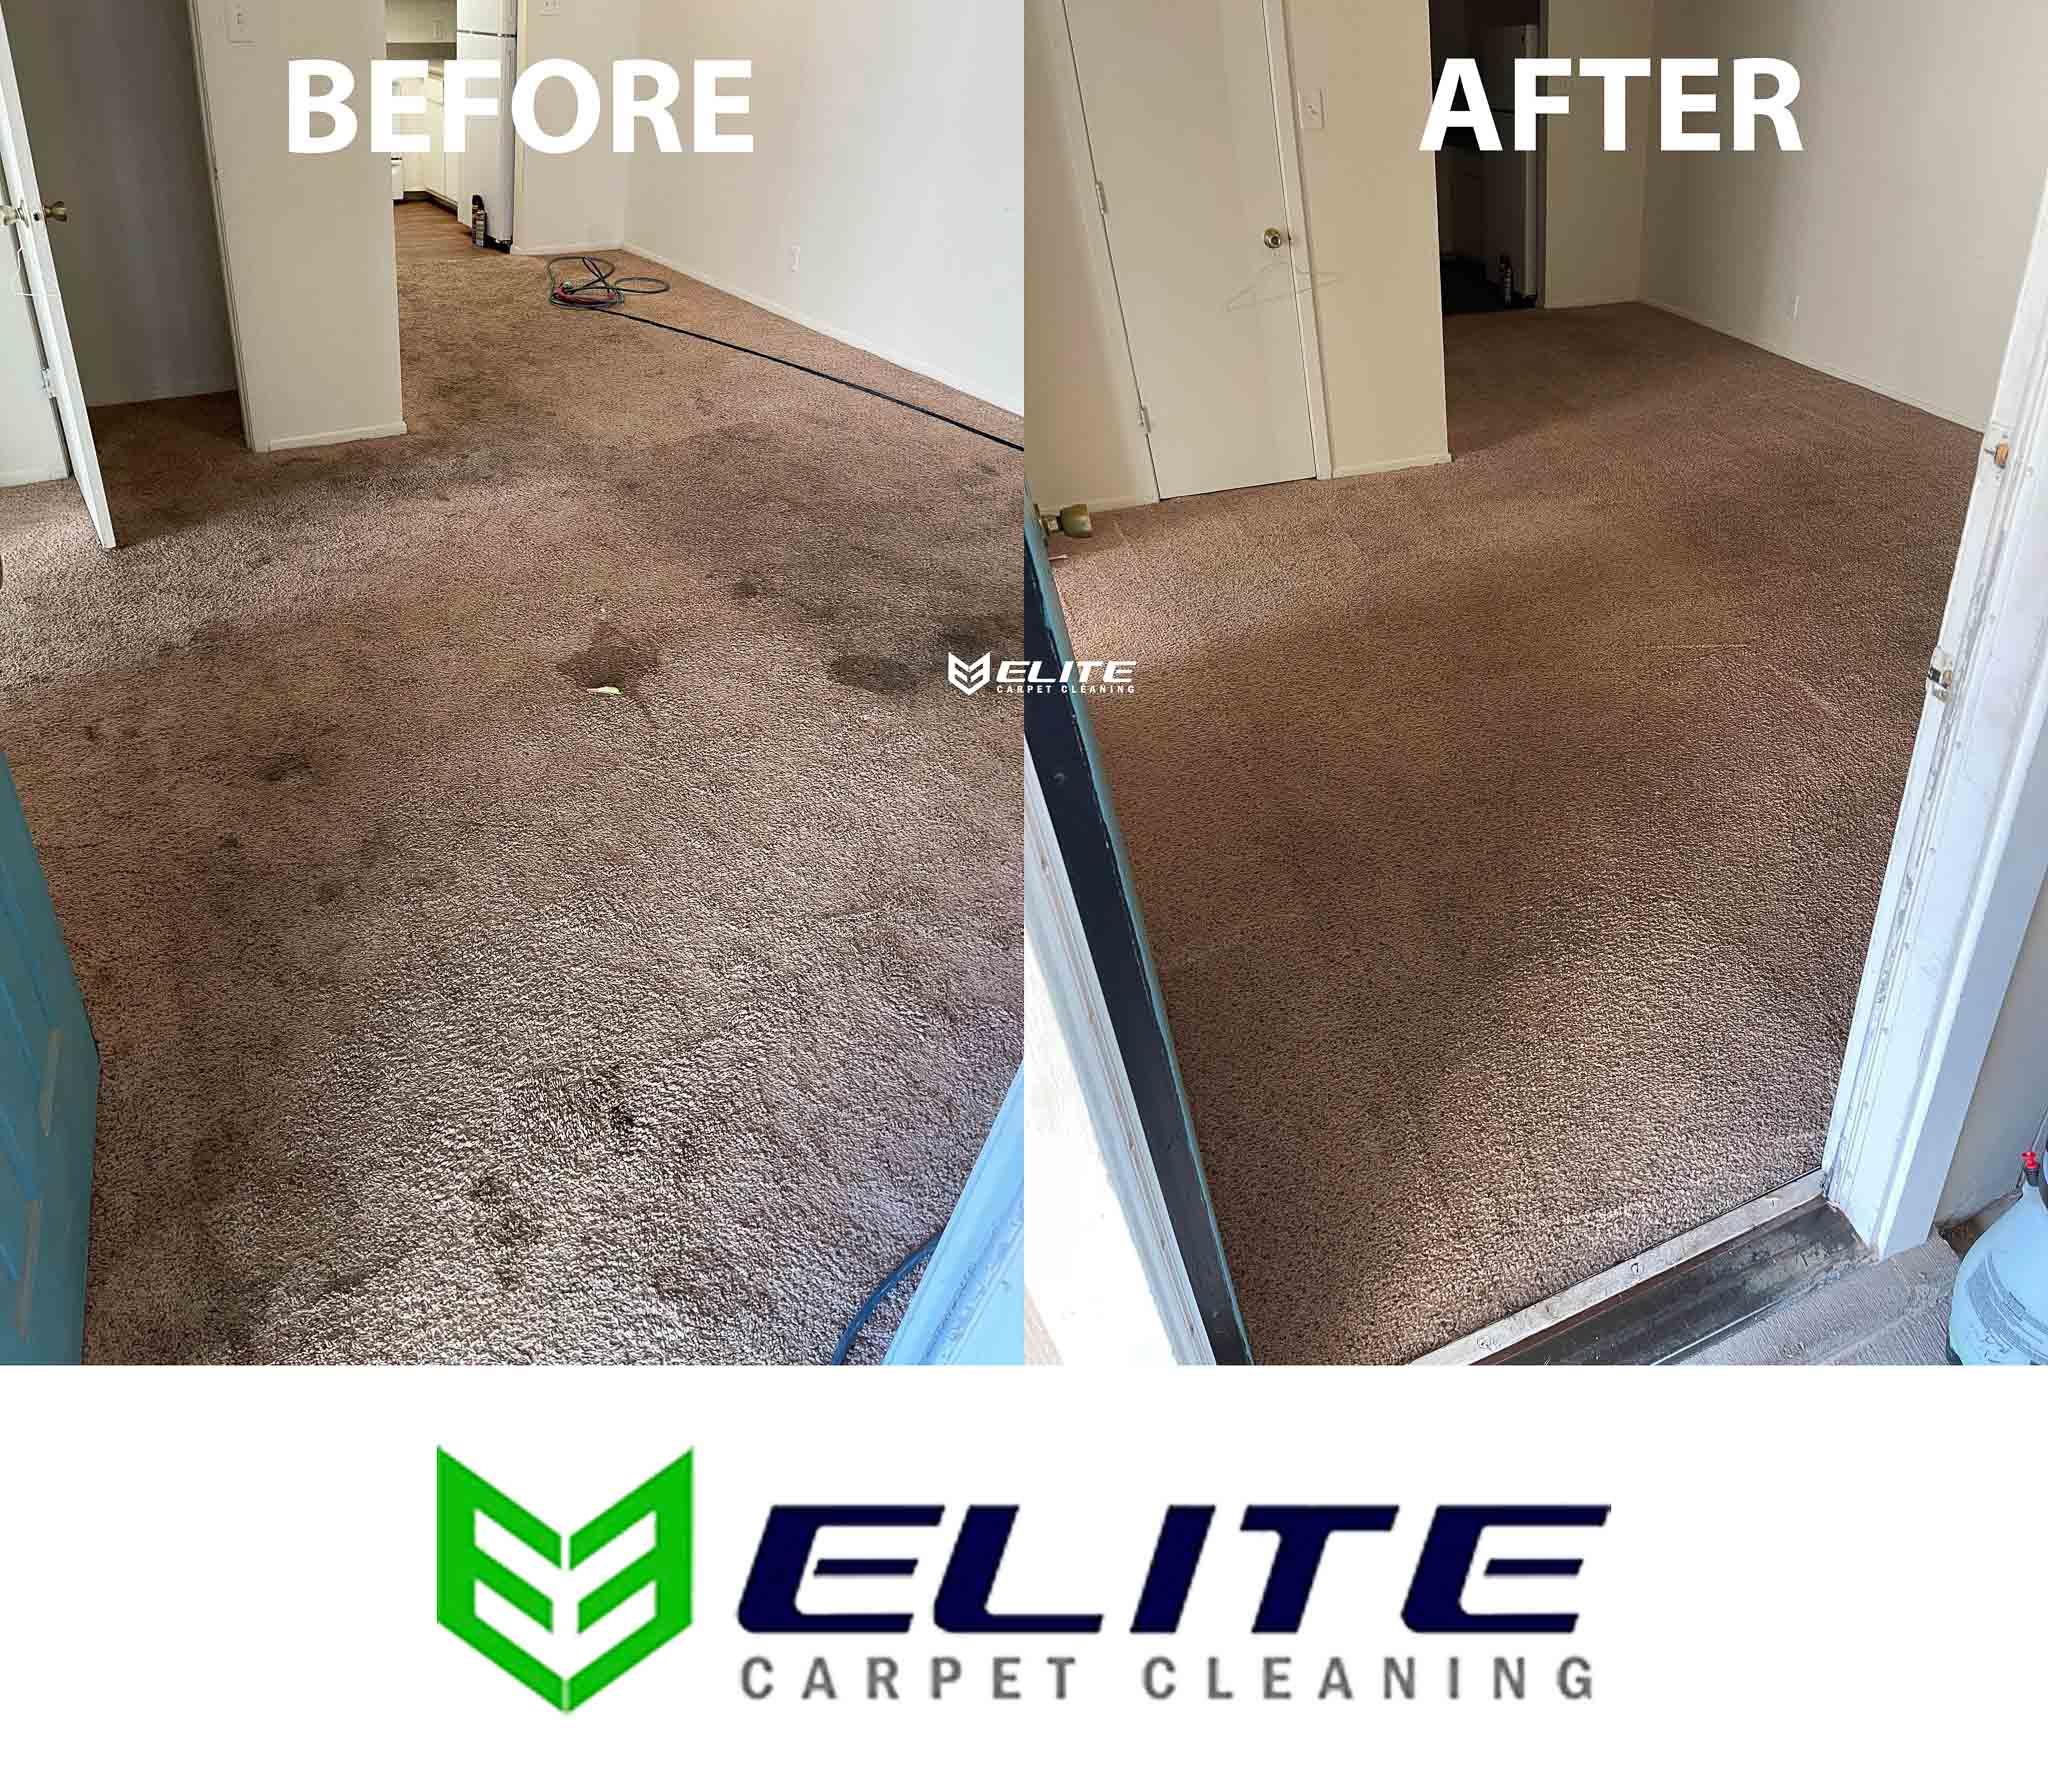 Residential carpet cleaning before and after photo in Fort Stockton tx